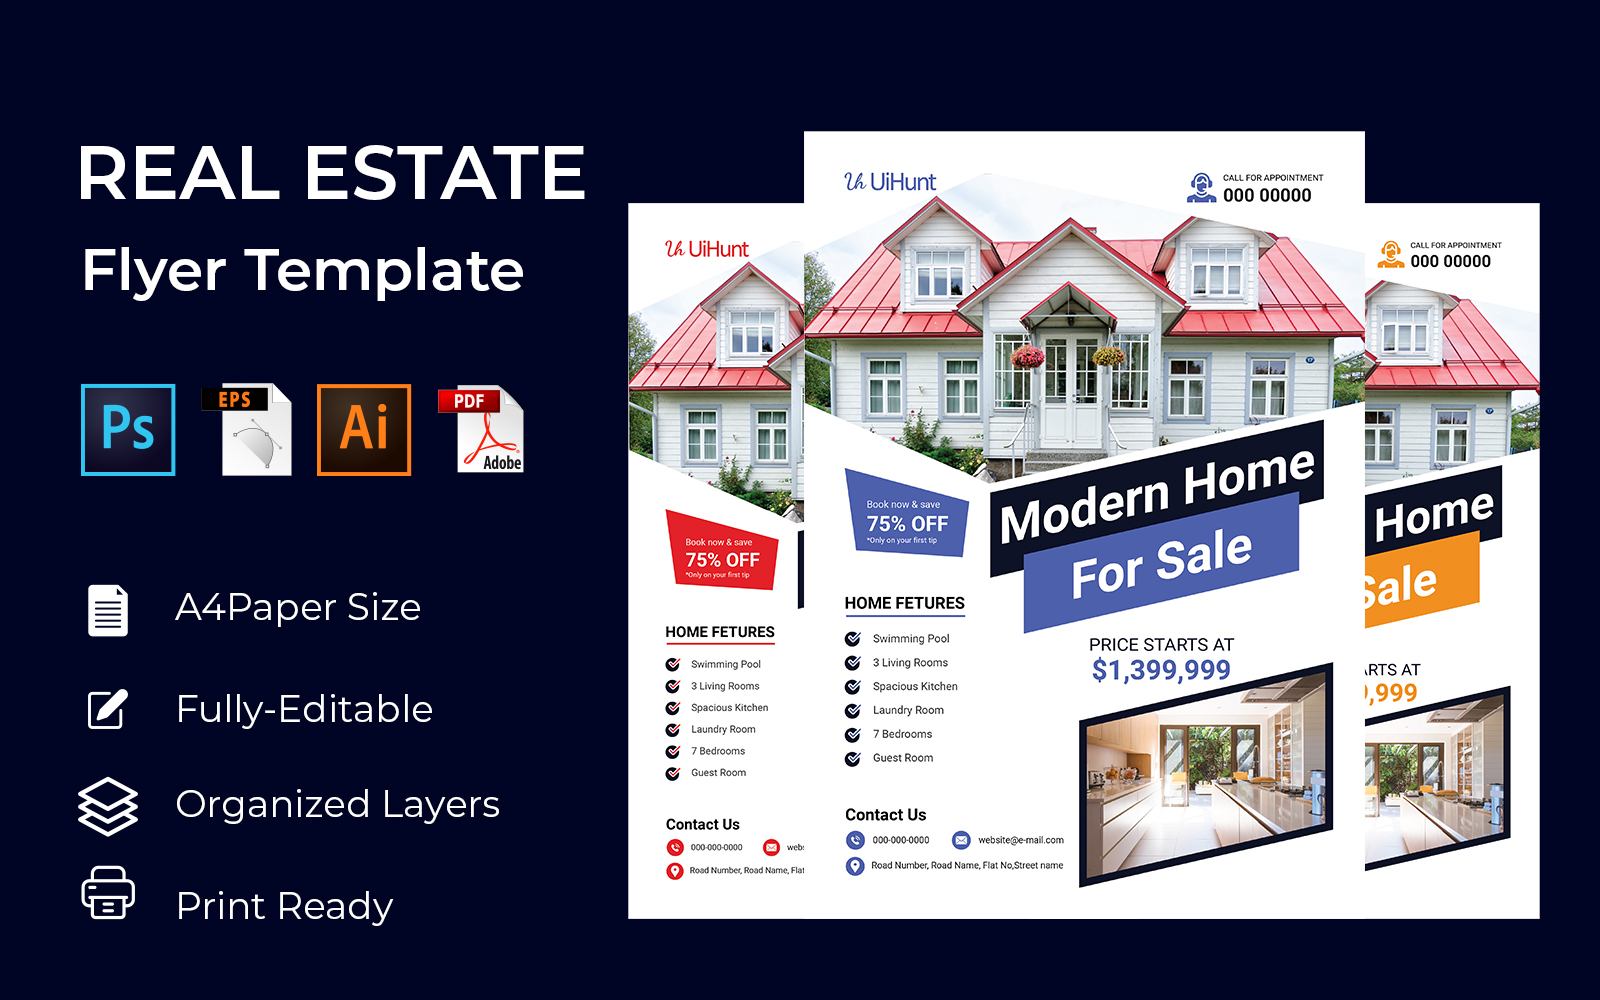 Real Estate Flyer Vol-02 - Corporate Identity Template